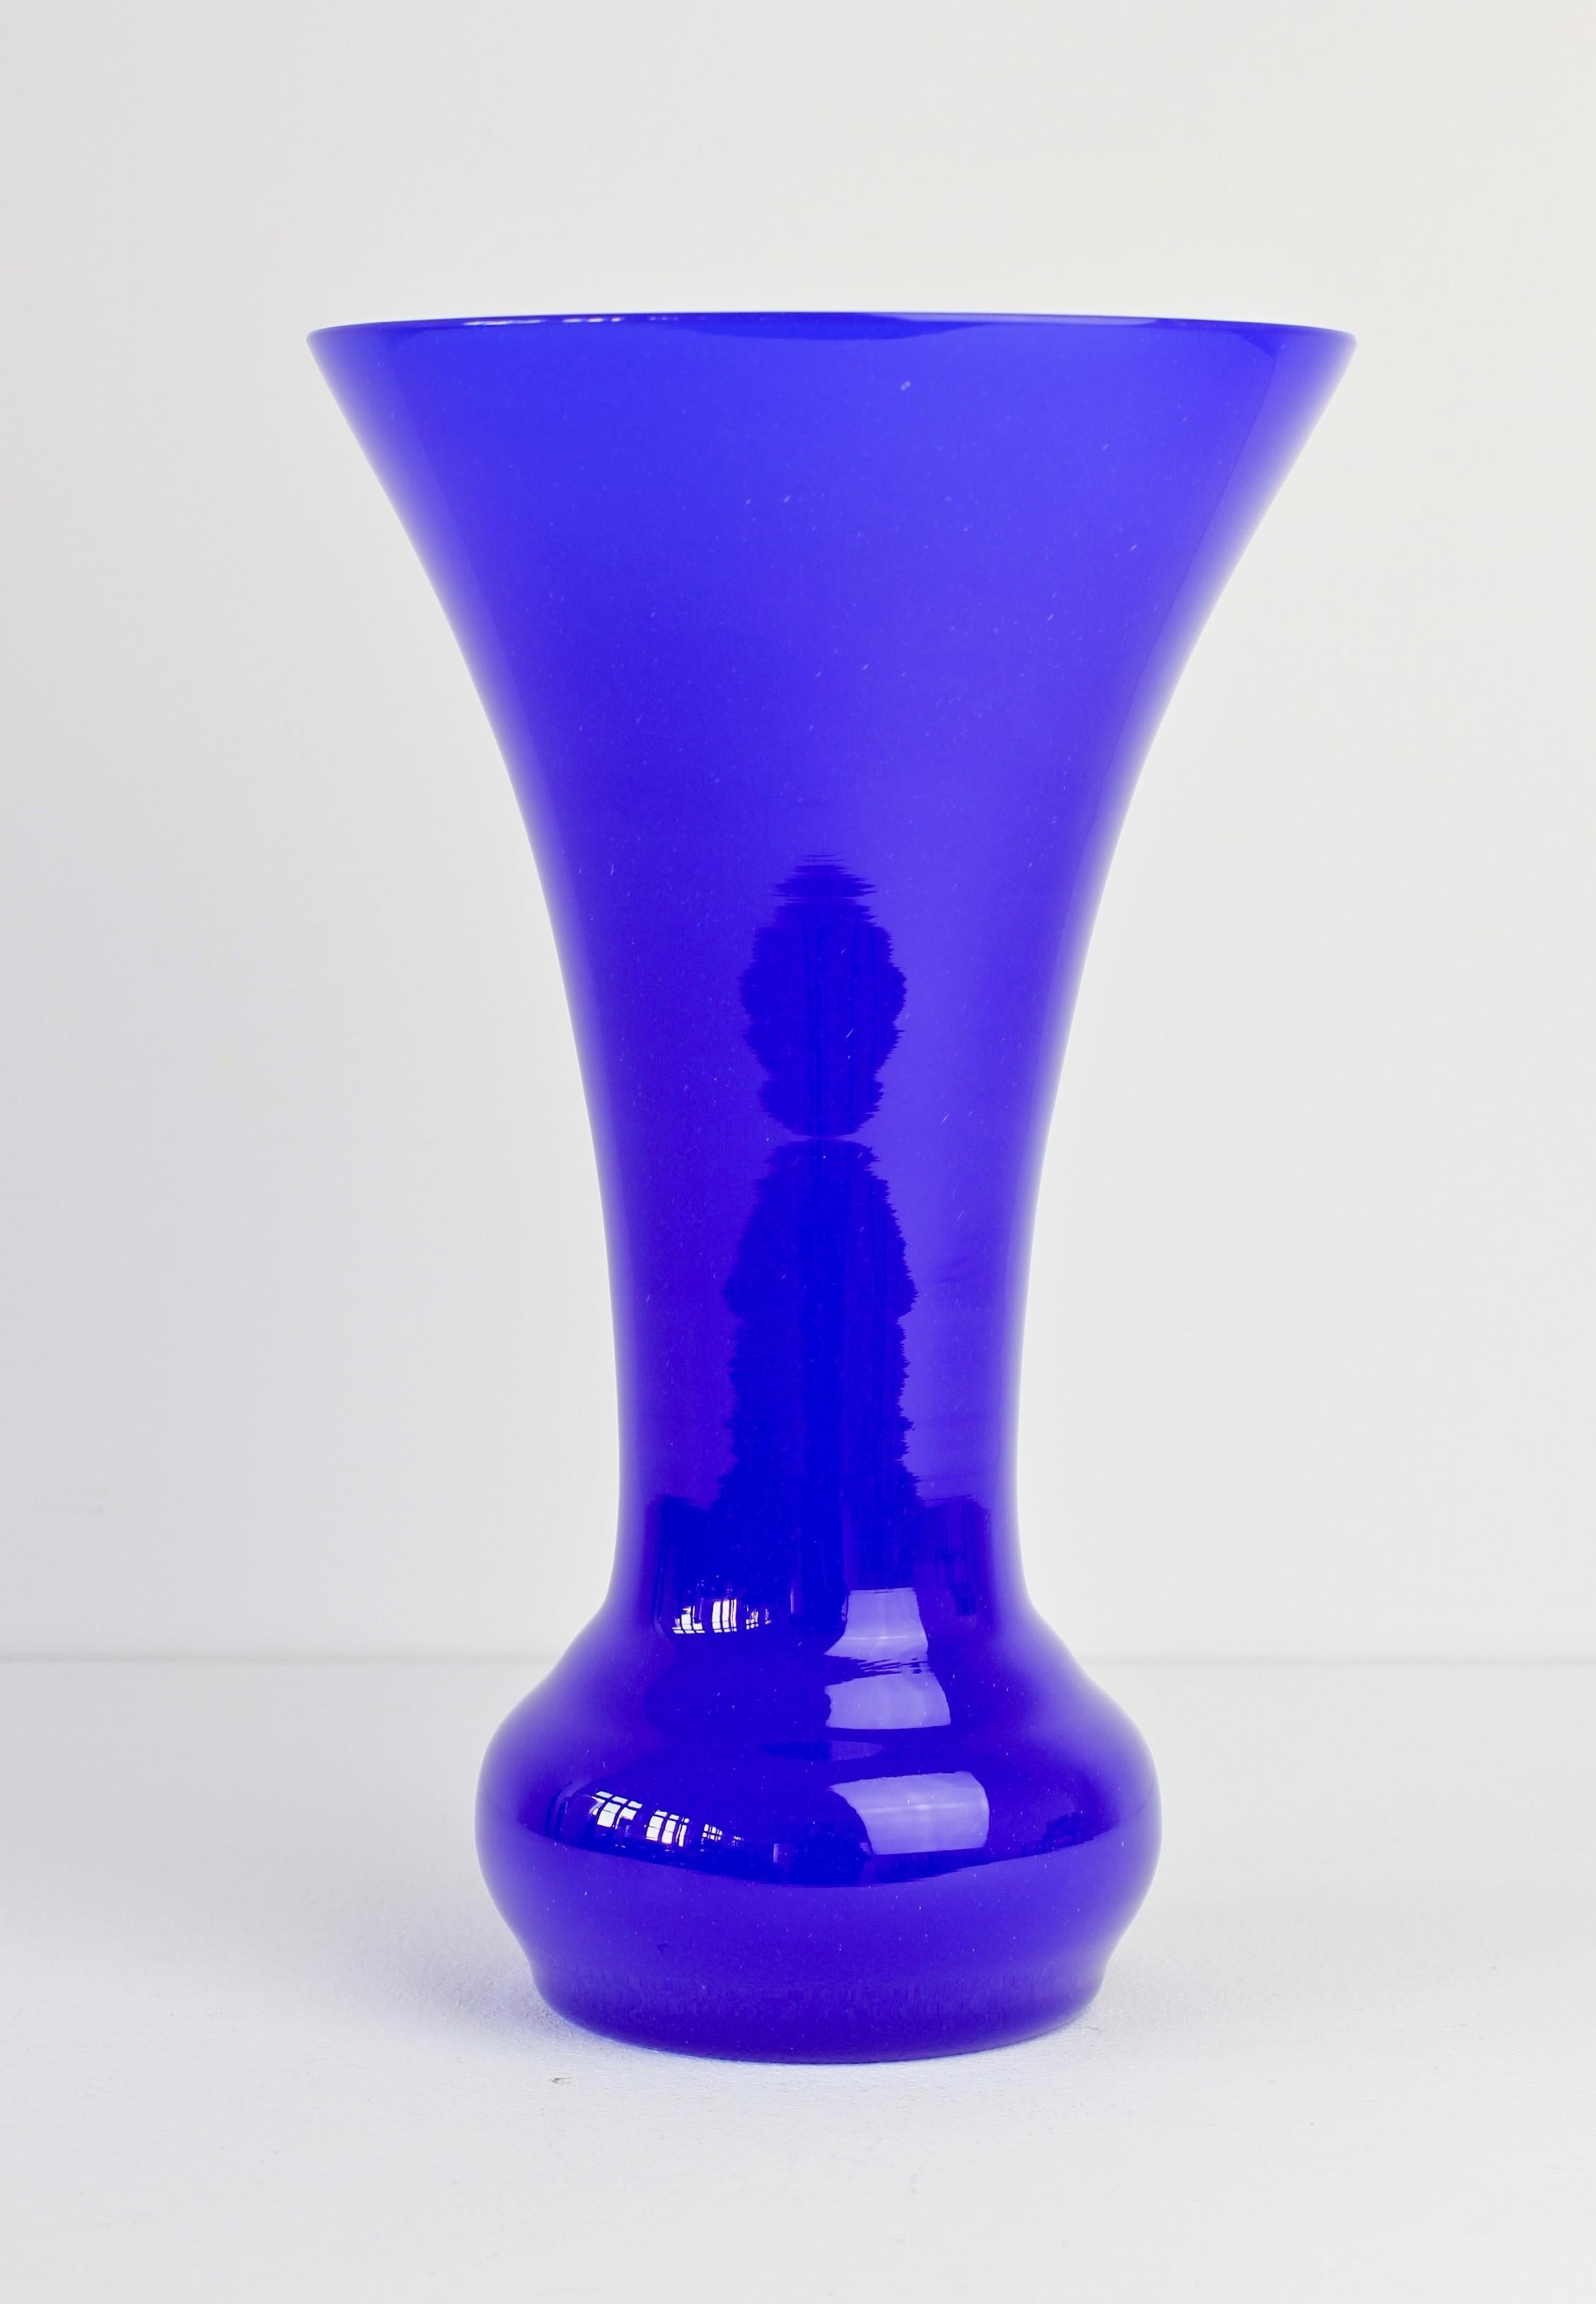 Wonderful tall deep cobalt blue vase by Cenedese Vetri of Murano, Italy. A fun, funky and bright way to add a touch of bold colour / color to your interior - imagine glass like this on open, white shelving in a kitchen, bathroom or in a display